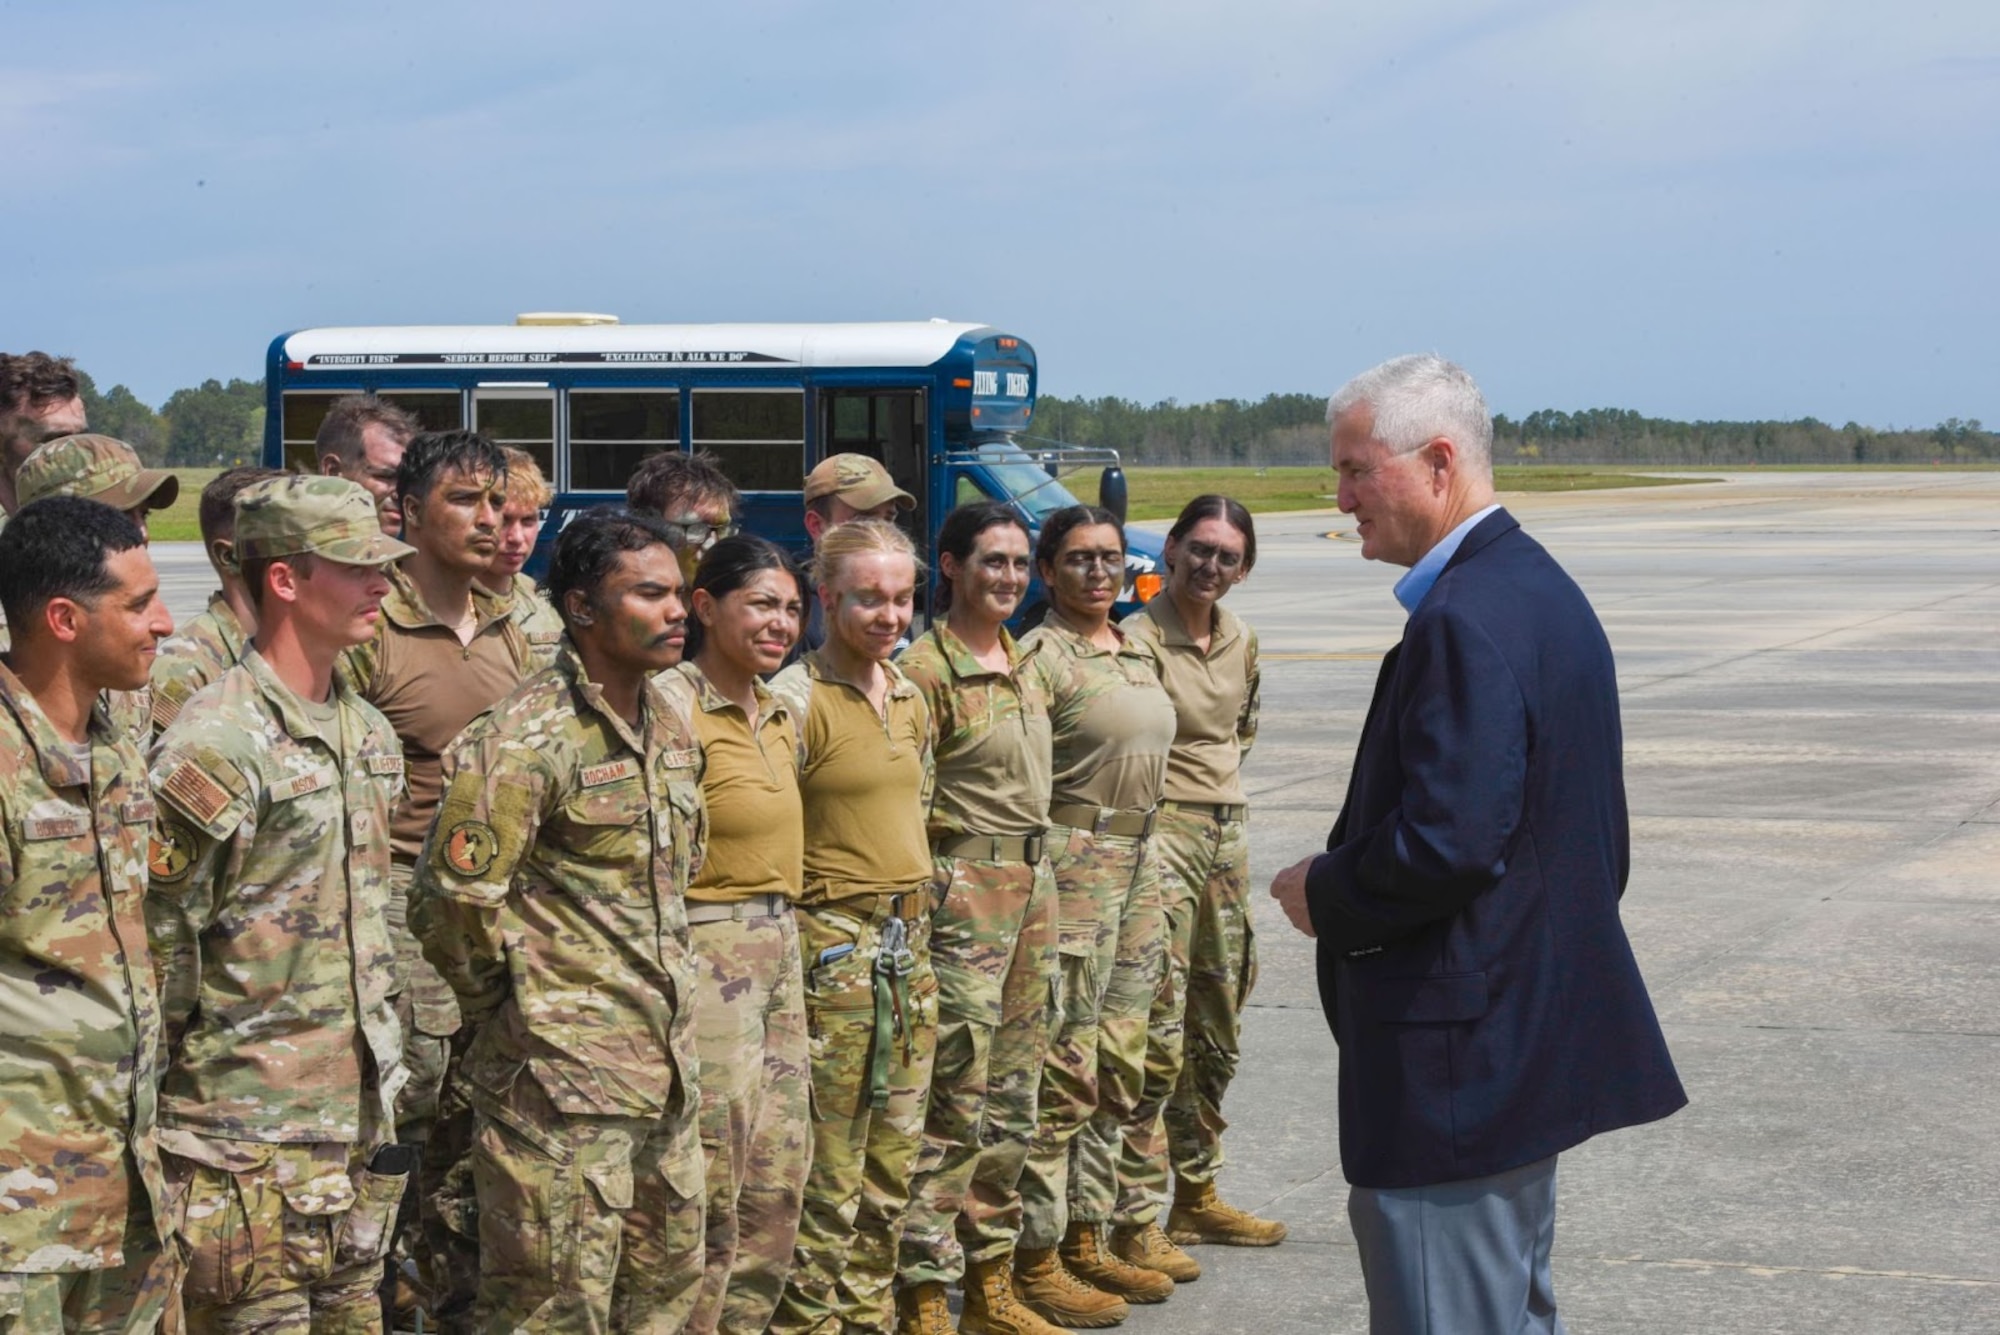 Chief Master Sgt. of the Air Force (ret.) Gerald R. Murray talks to Airmen assigned to the 820th Base Defense Group at Moody Air Force Base, Georgia, March 15, 2023. The BDG is tasked with the defense of the installation and has security force, communications, and explosive ordnance disposal units. (U.S. Air Force photo by Airman 1st Class Sir Wyrick)